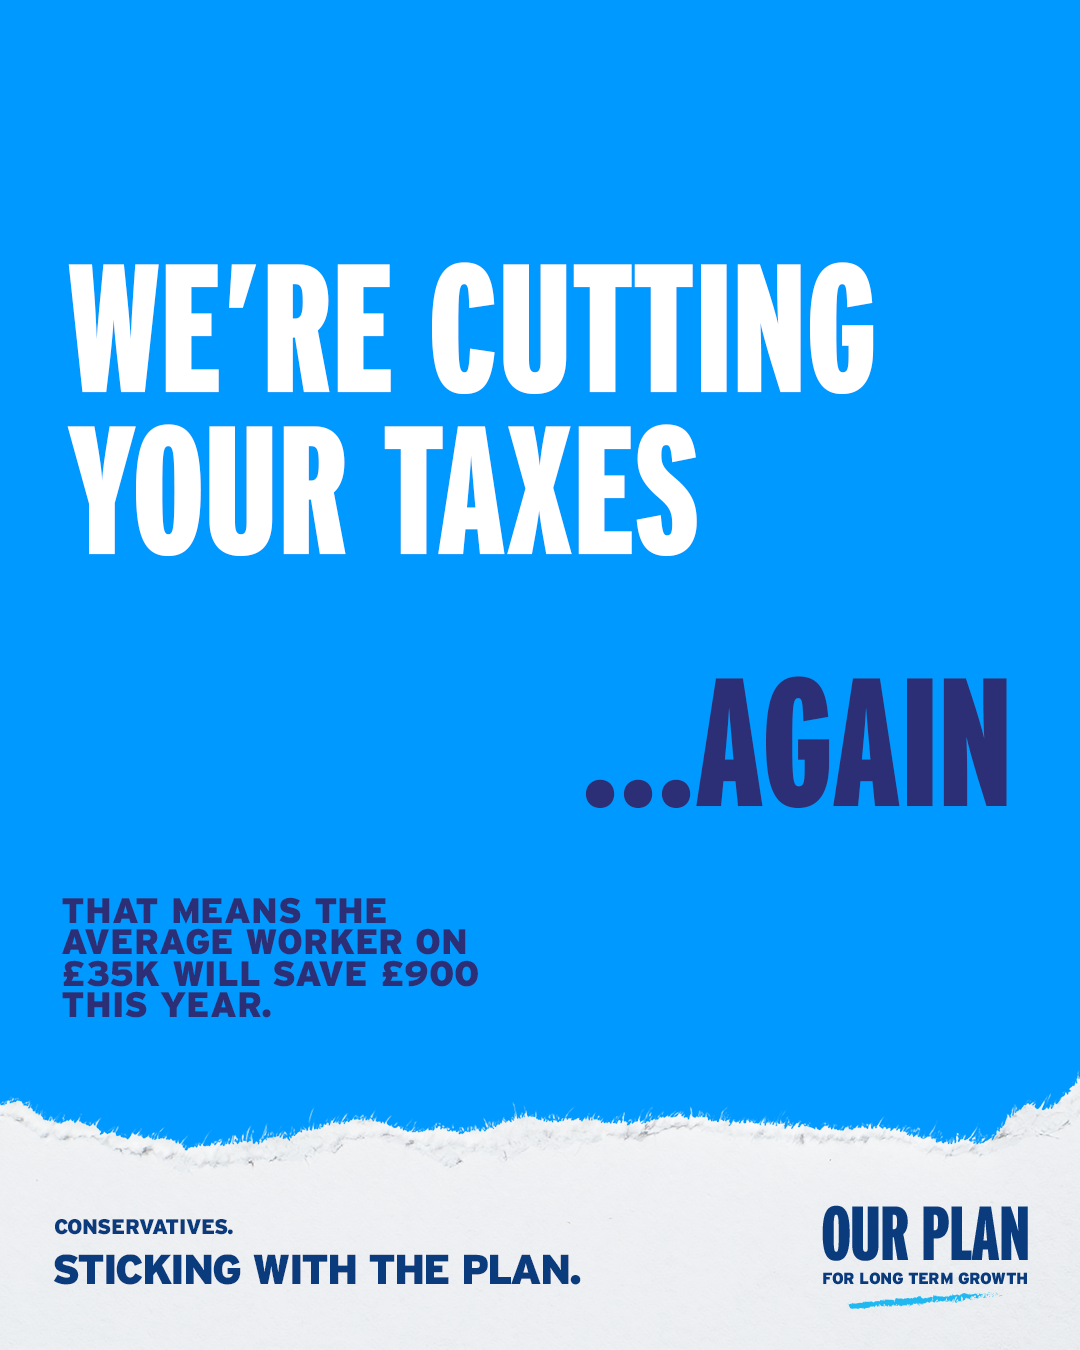 We're cutting your taxes again